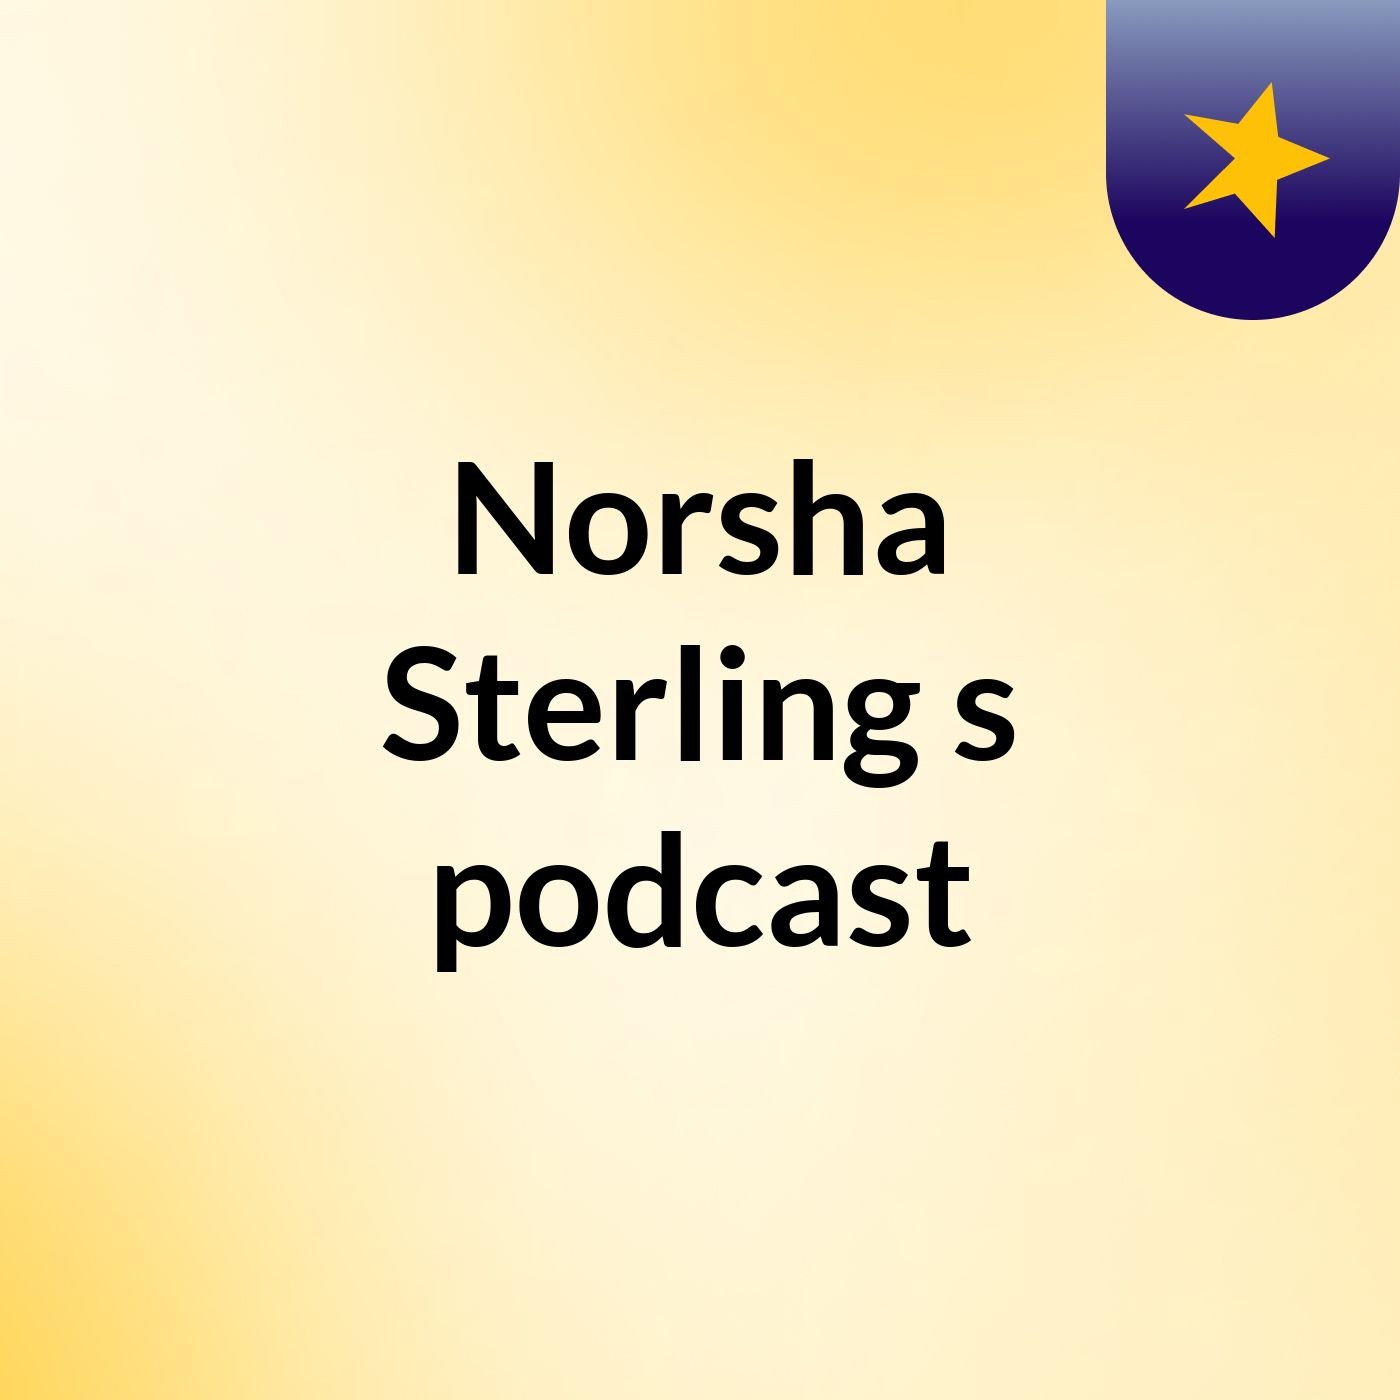 Norsha Sterling's podcast